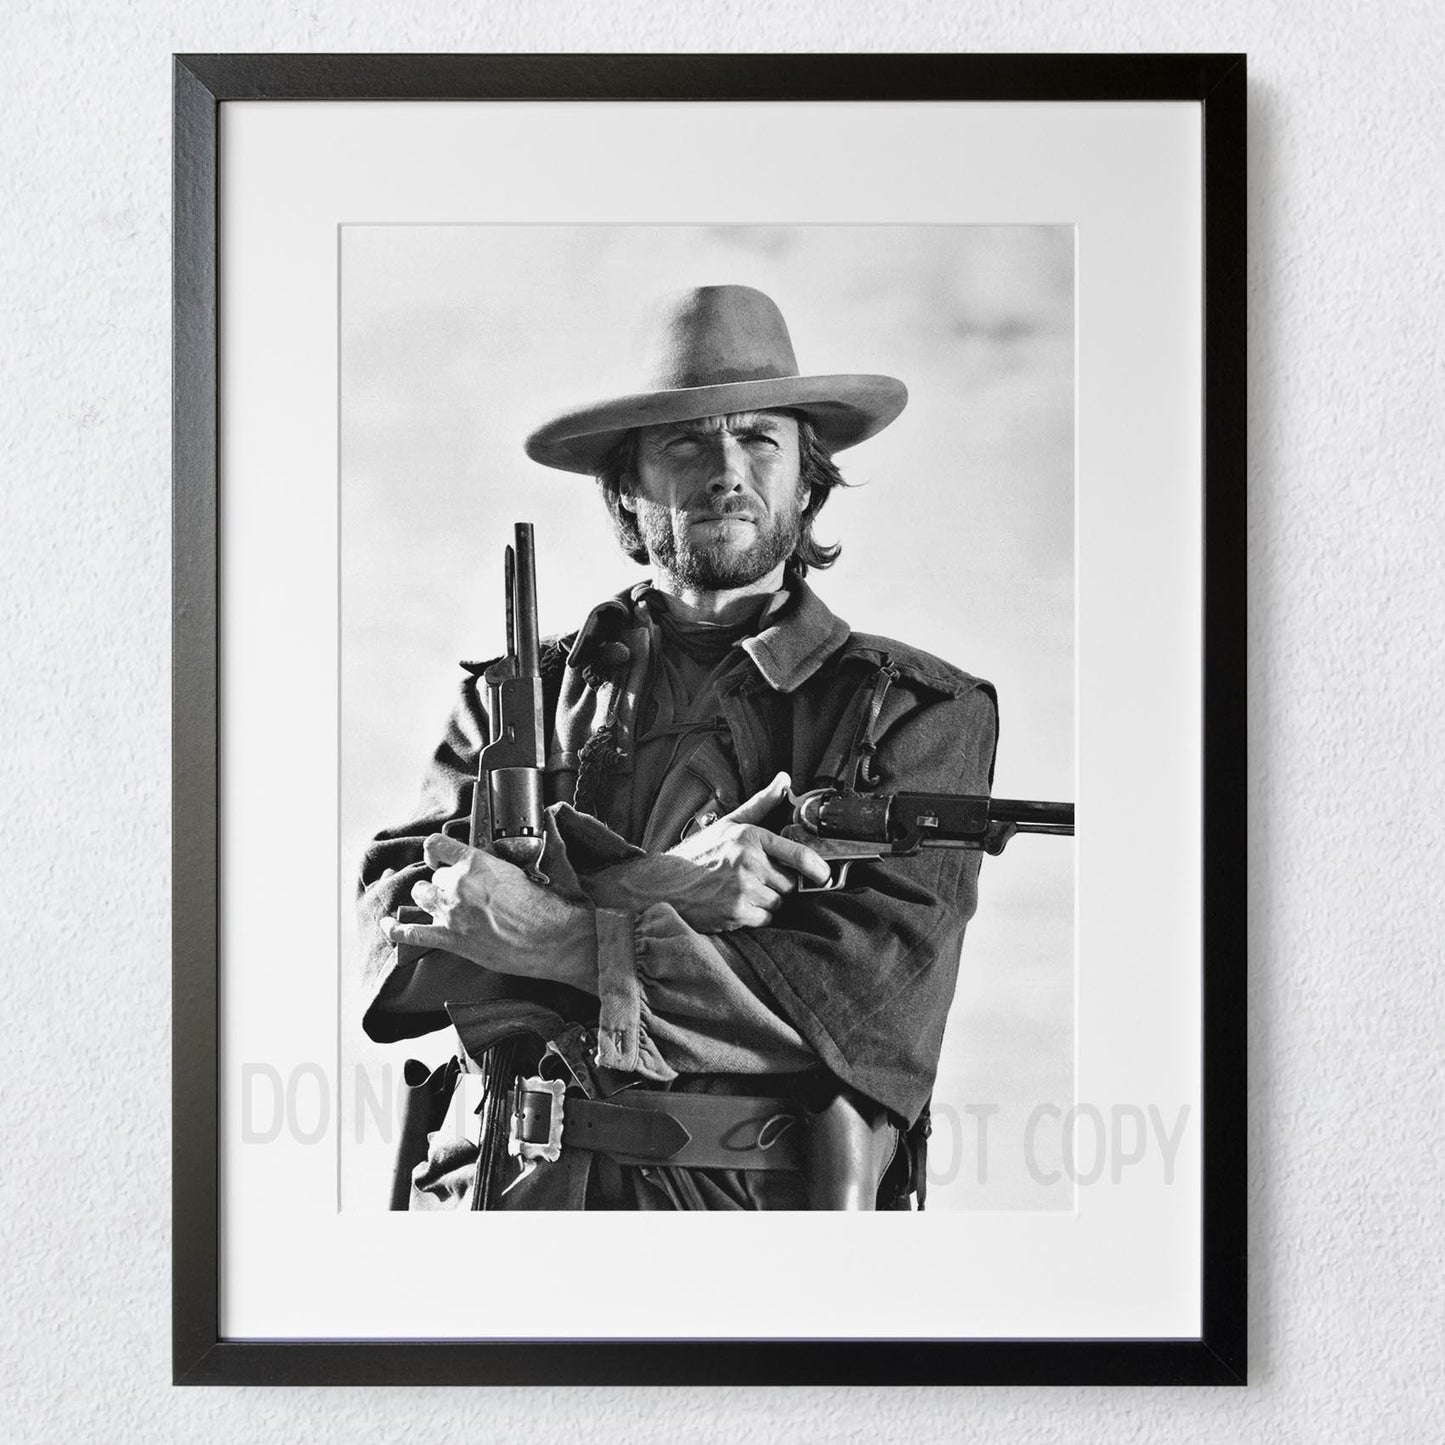 Clint Eastwood in The Outlaw Josey Wales 1975